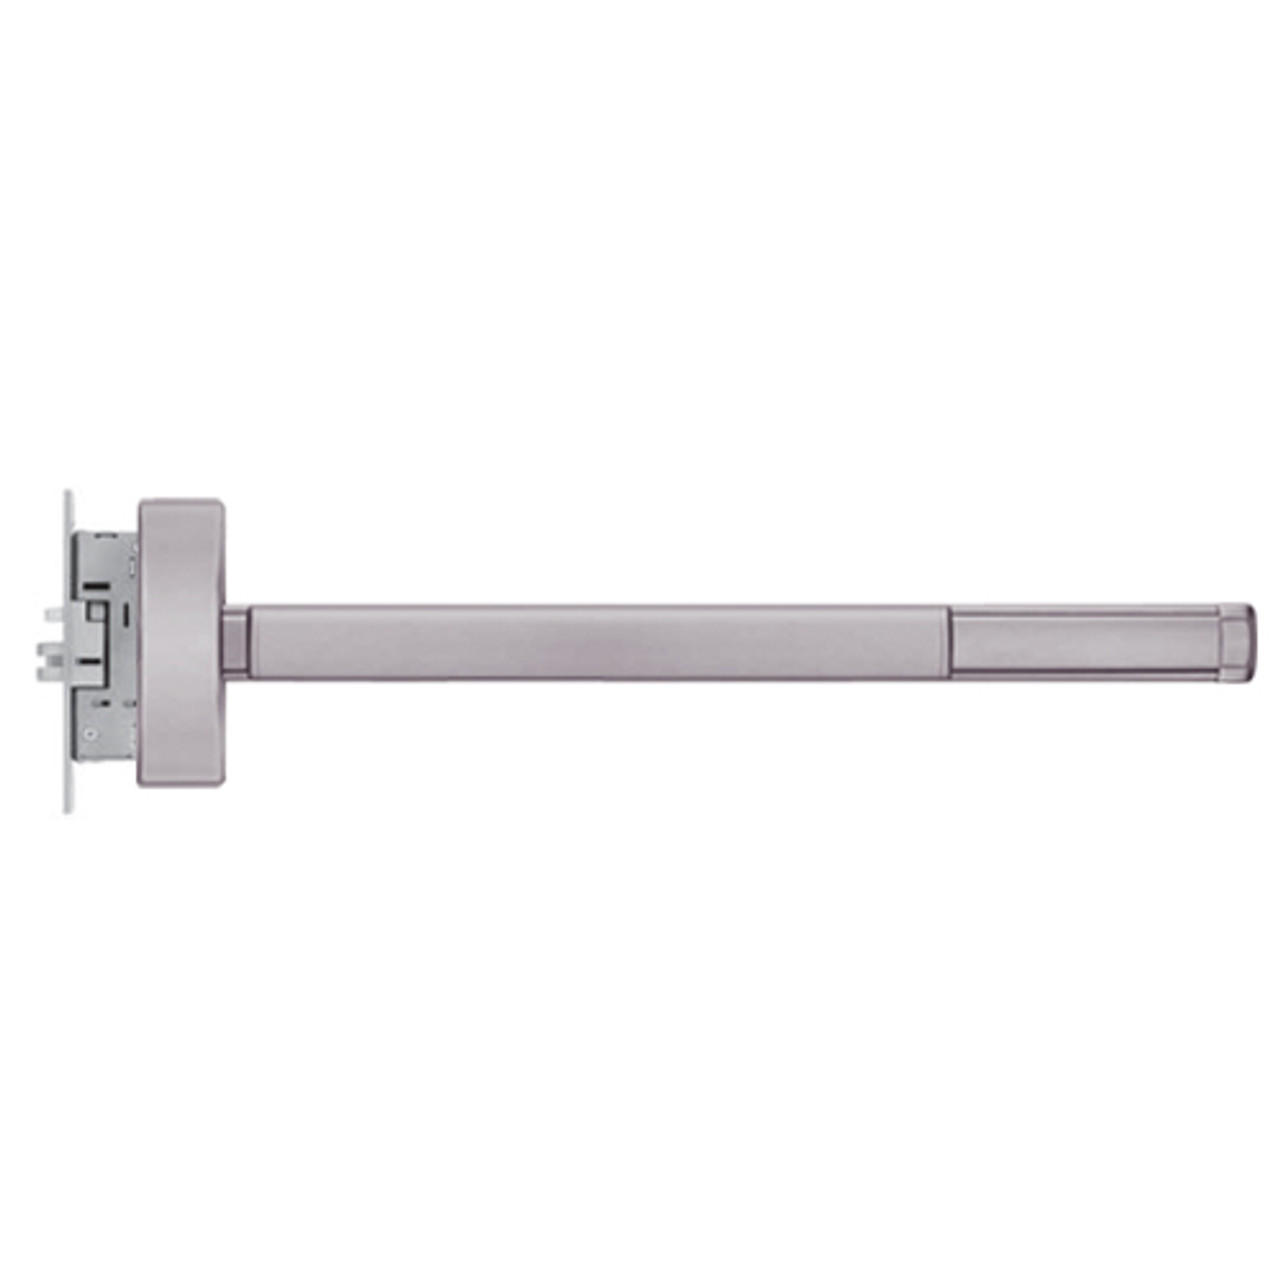 TSFL2305-RHR-630-36 PHI 2300 Series Fire Rated Apex Mortise Exit Device with Touchbar Monitoring Switch Prepped for Key Controls Thumb Piece in Satin Stainless Steel Finish